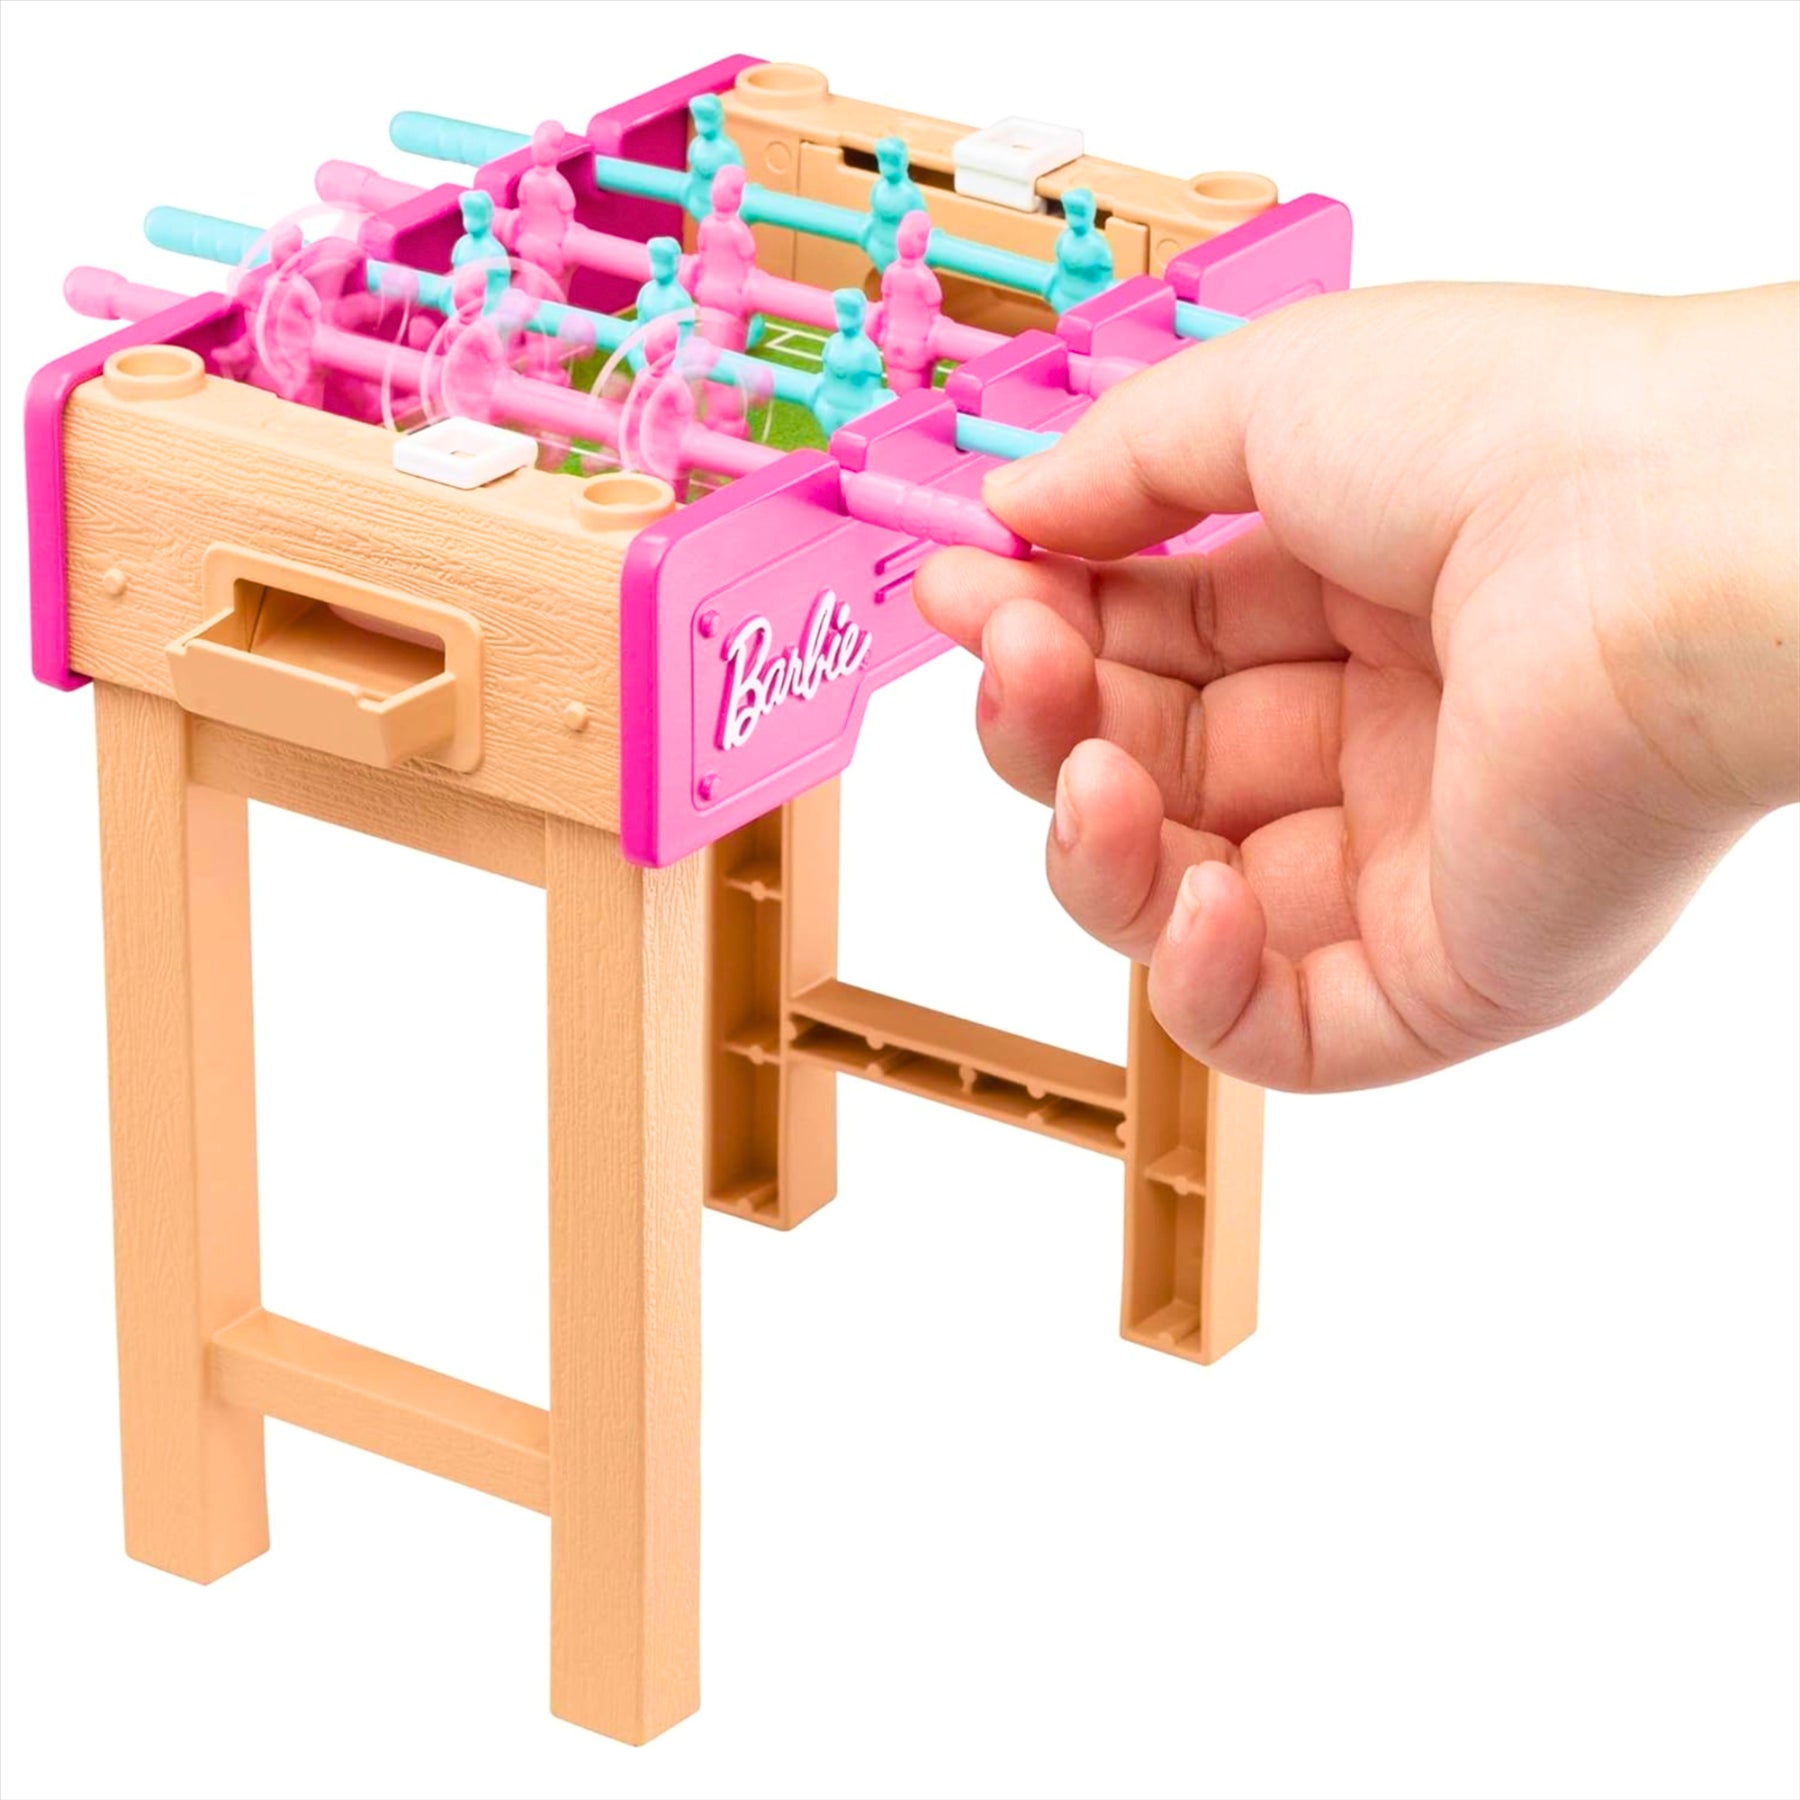 Barbie Foosball Playset with Dog and Accessories - Includes Functional Foosball Table, Dog Figure, and Snacks - Toptoys2u